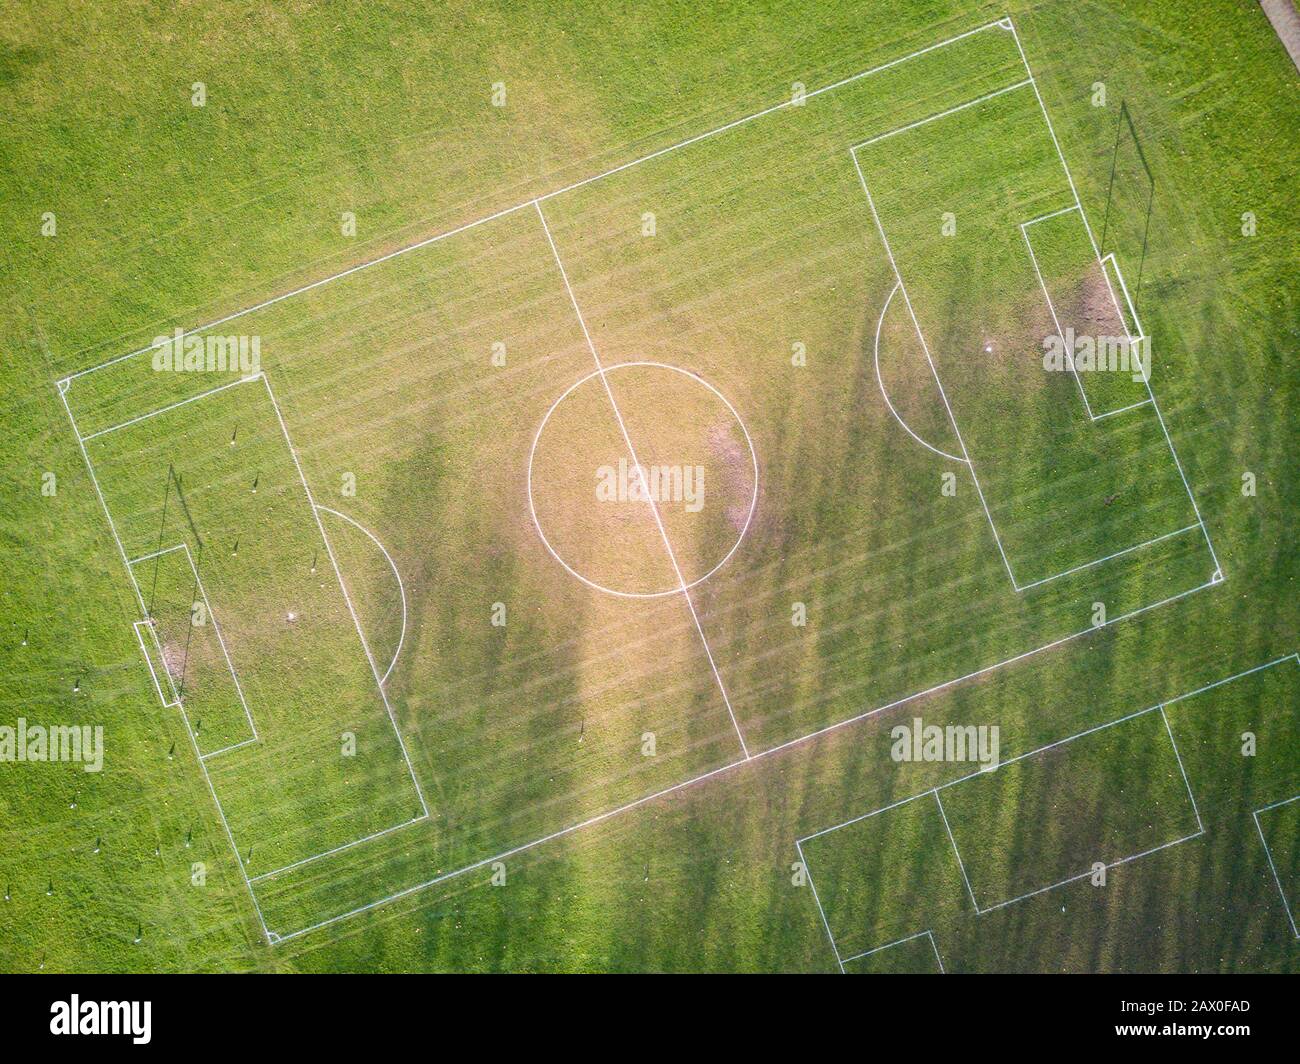 Football pitch. Aerial drone view looking down vertically onto an empty soccer pitch with shadows cast by the low sun. Stock Photo